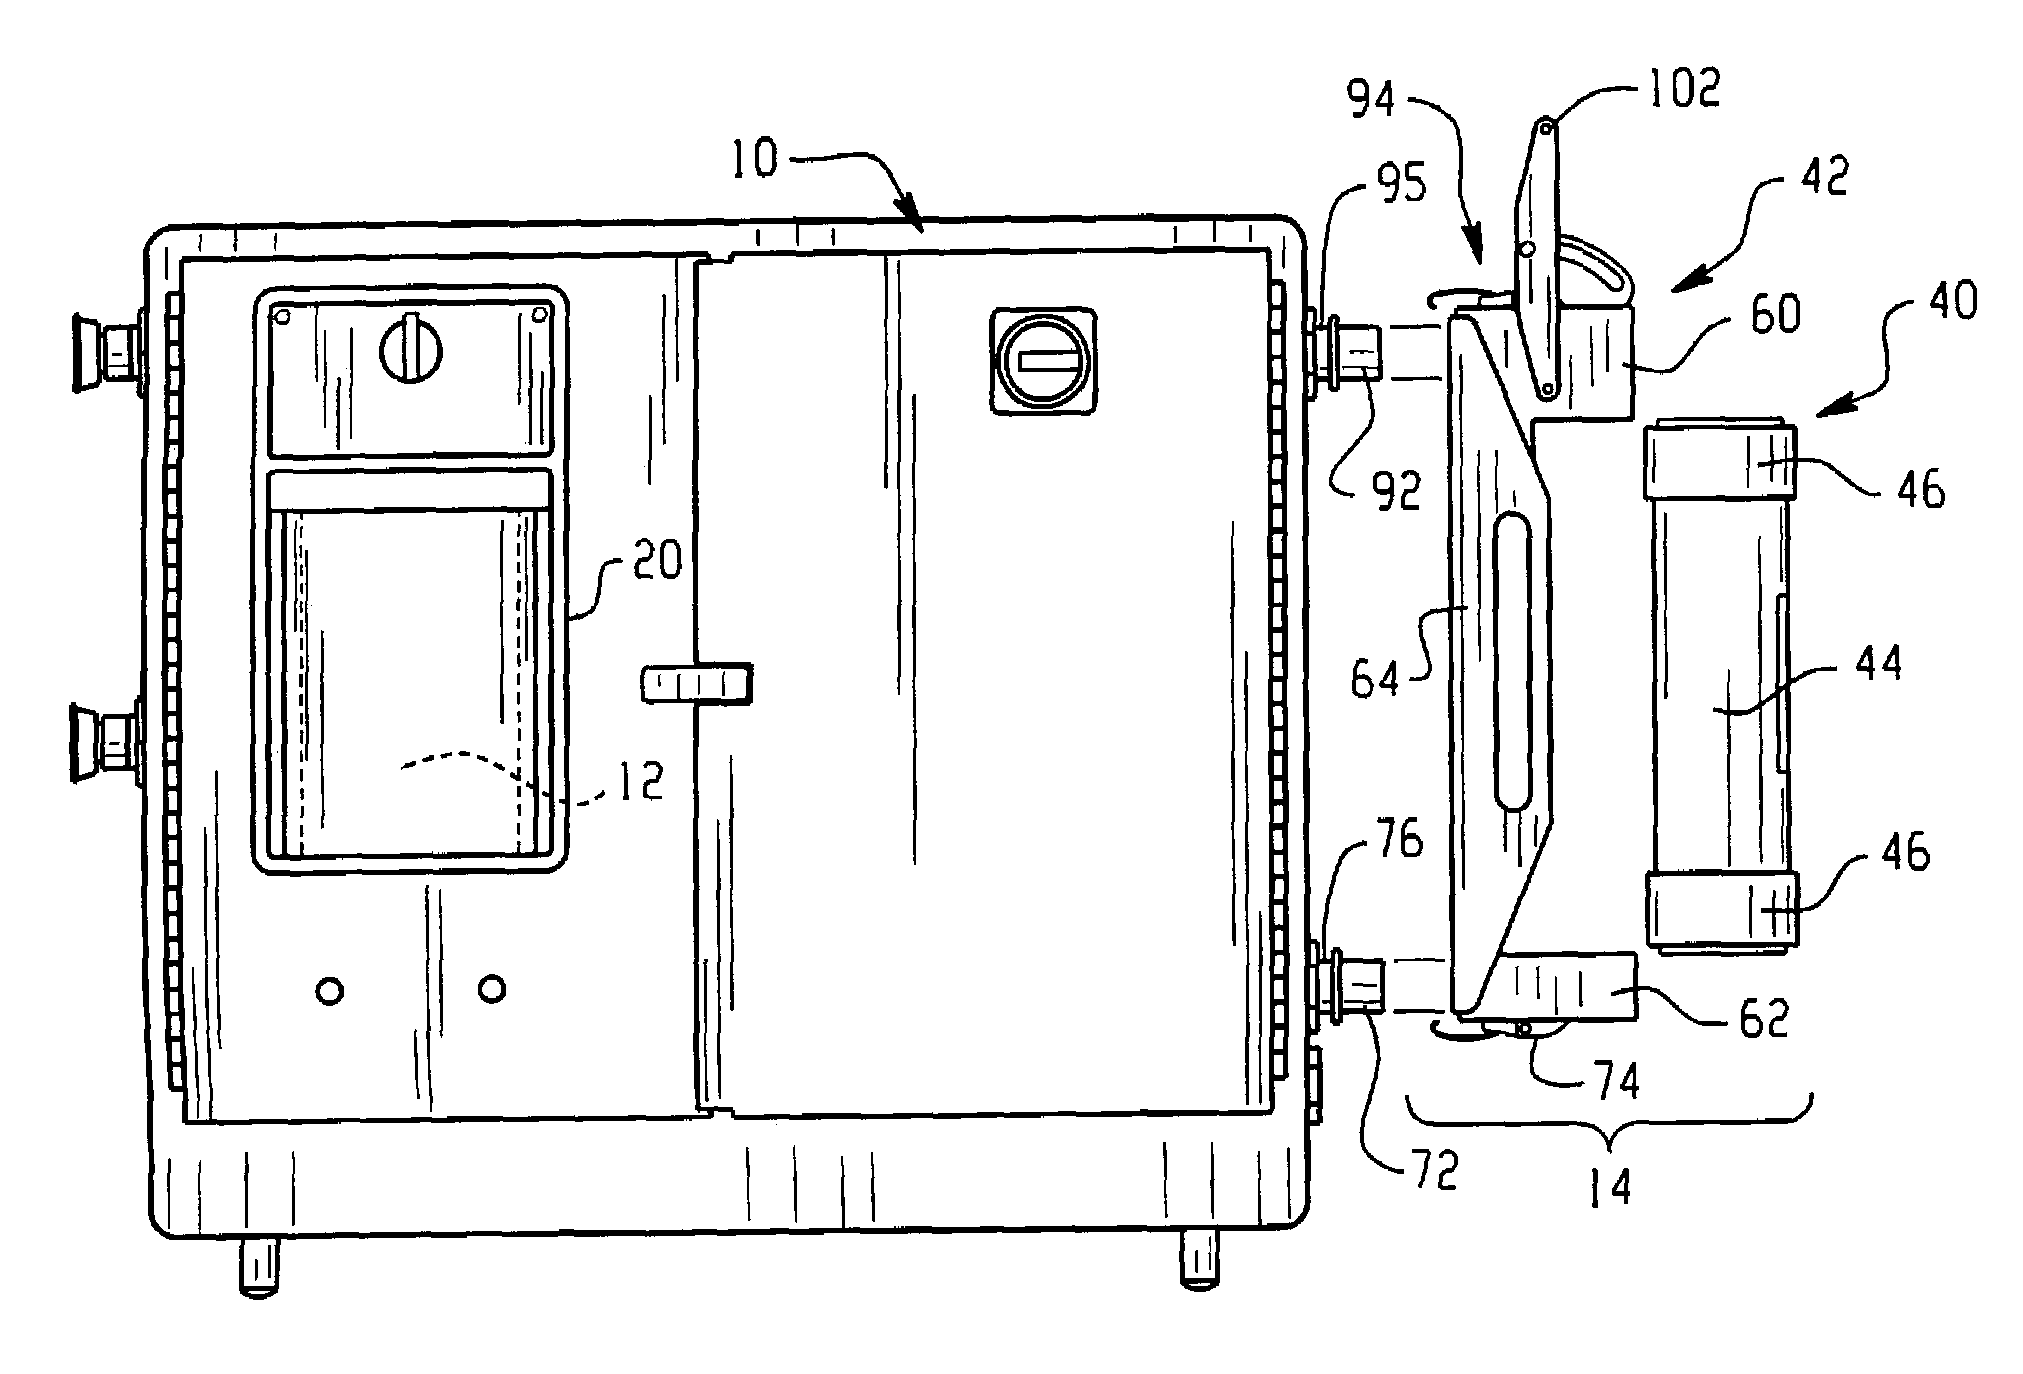 Hydrogen peroxide vapor system with replaceable desiccant cartridge